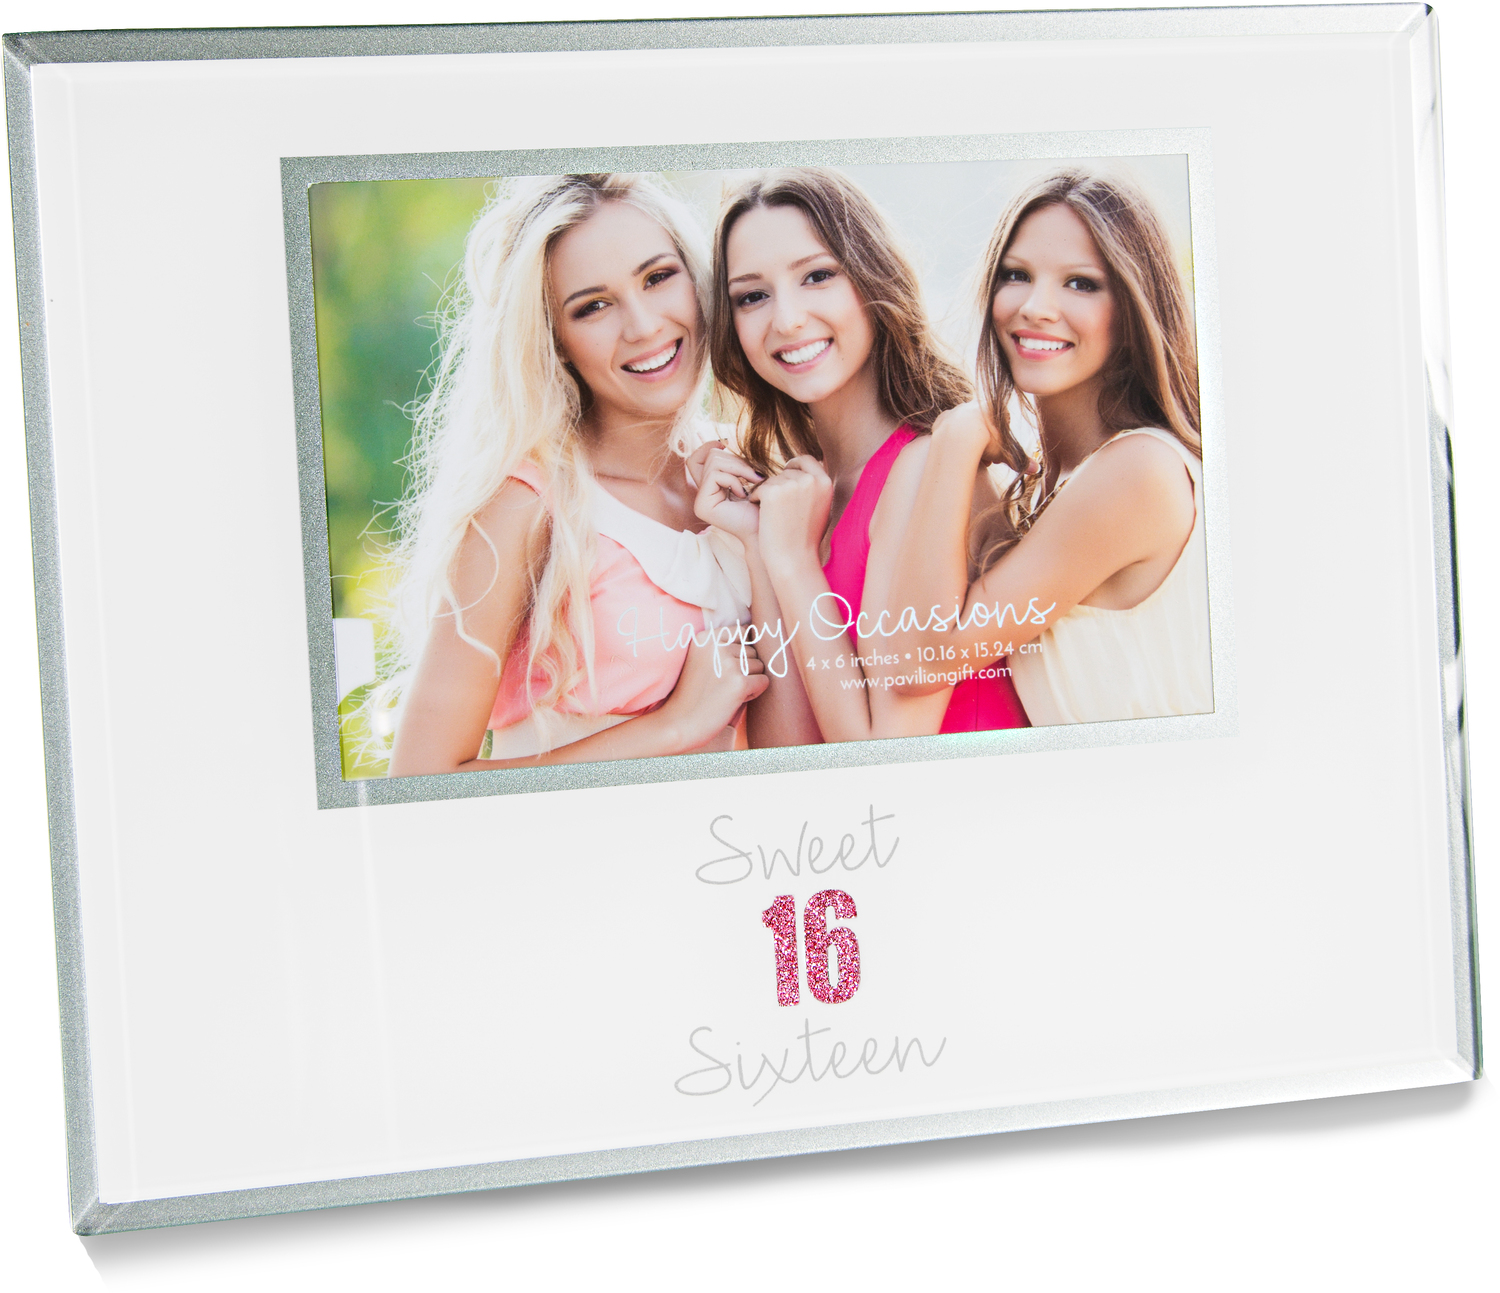 Sixteen by Happy Occasions - Sixteen - 9.25" x 7.25" Frame
(Holds 6" x 4" Photo)